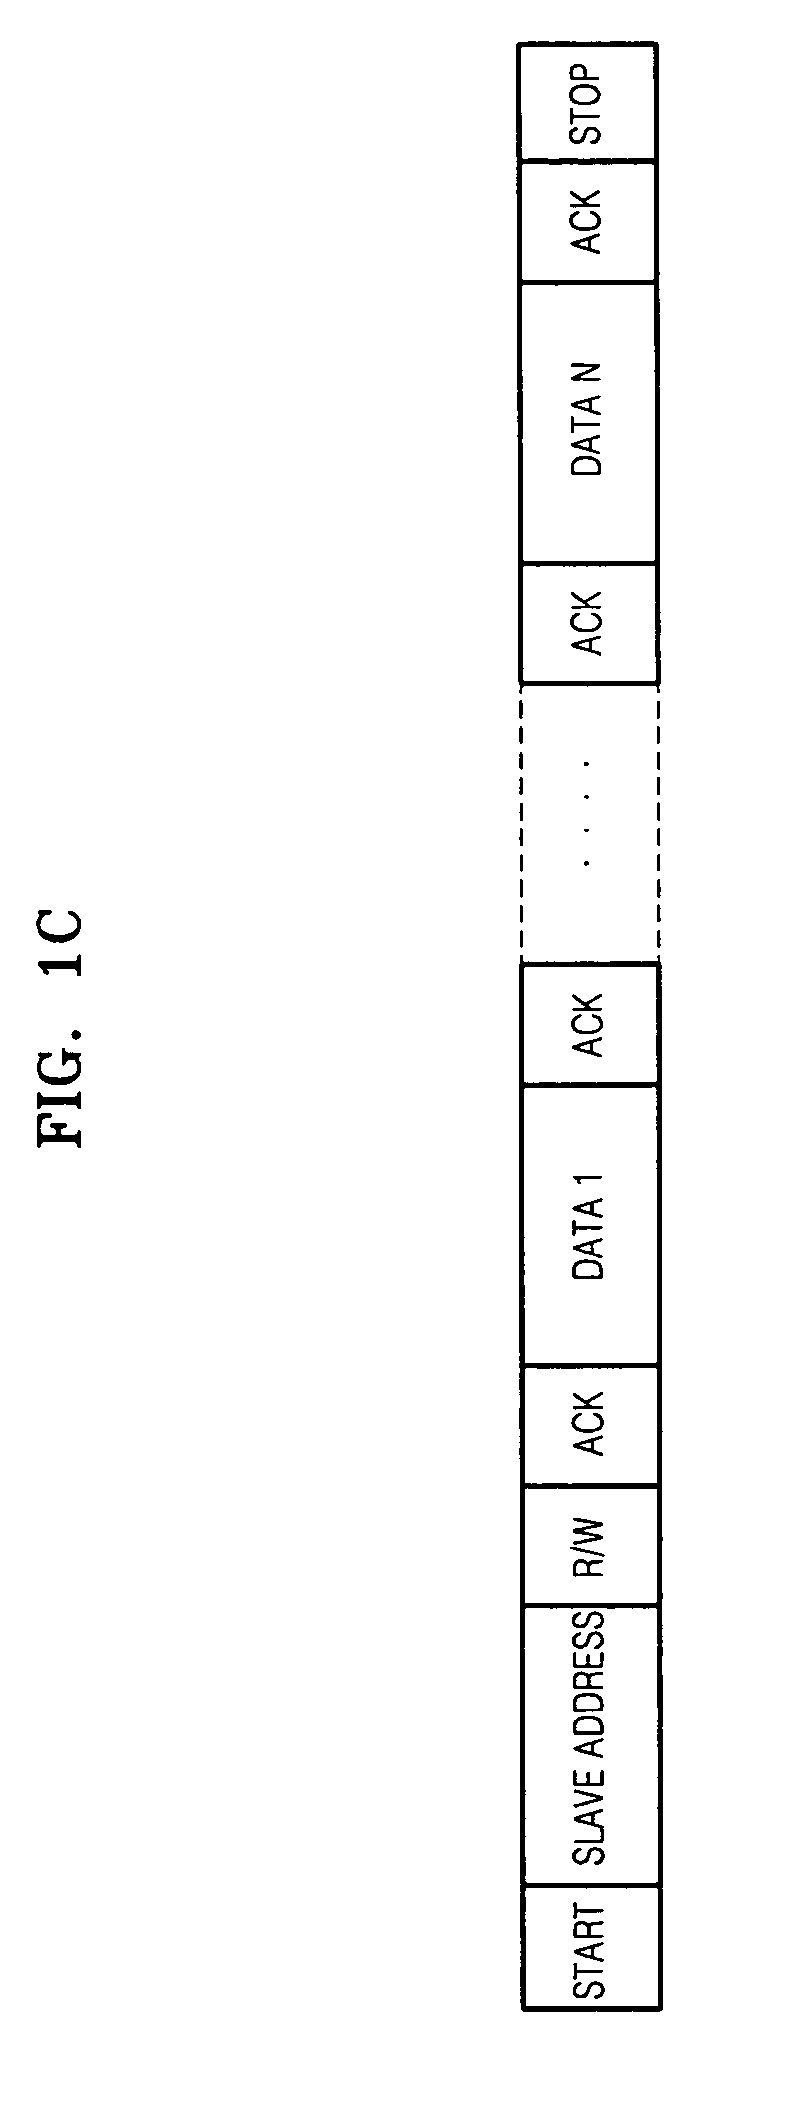 Apparatus to recognize memory devices